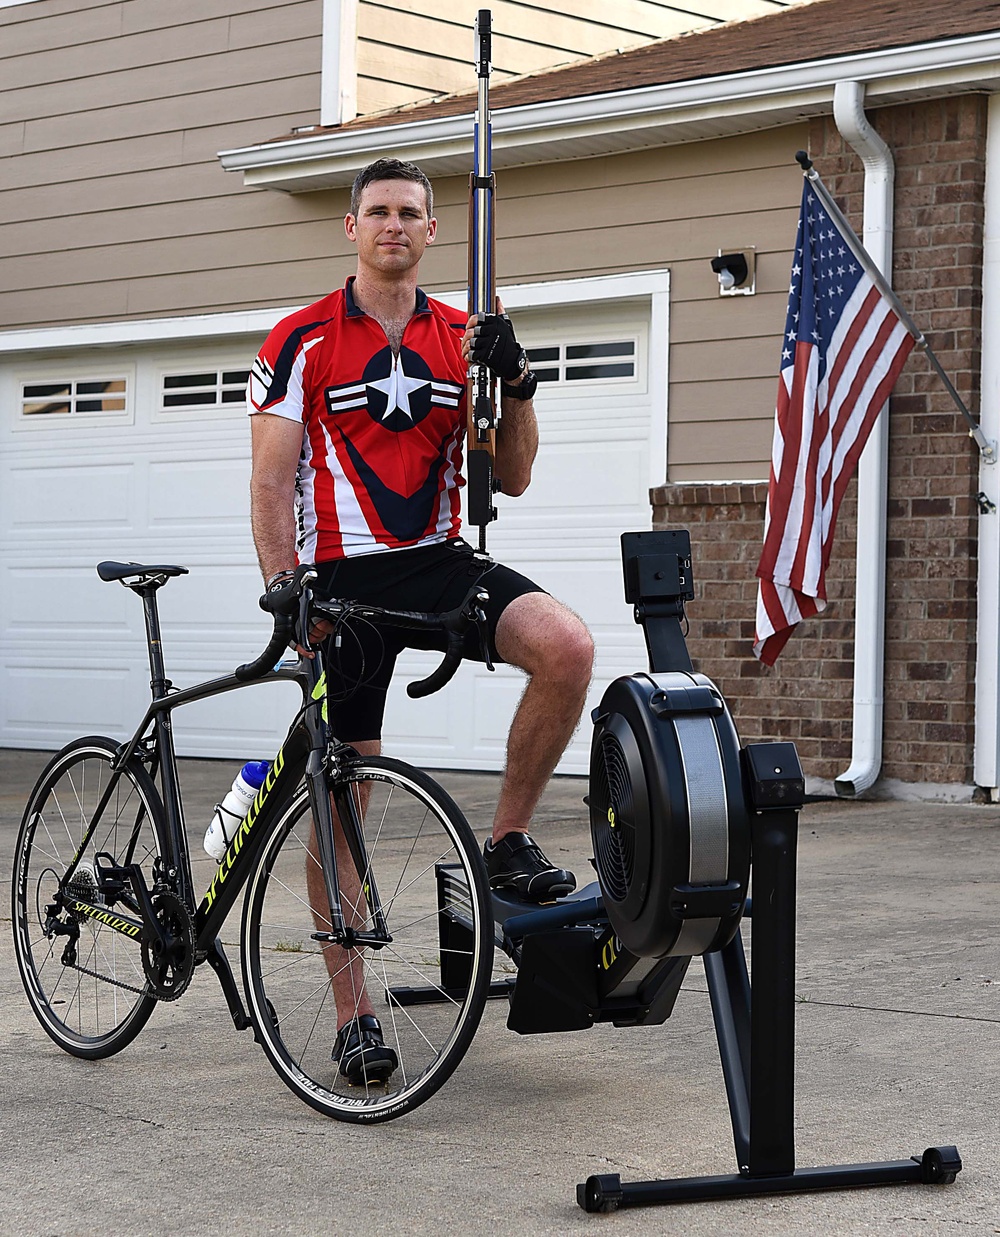 Instructor pilot shares experience in AFW2 program before competing in Warrior Games